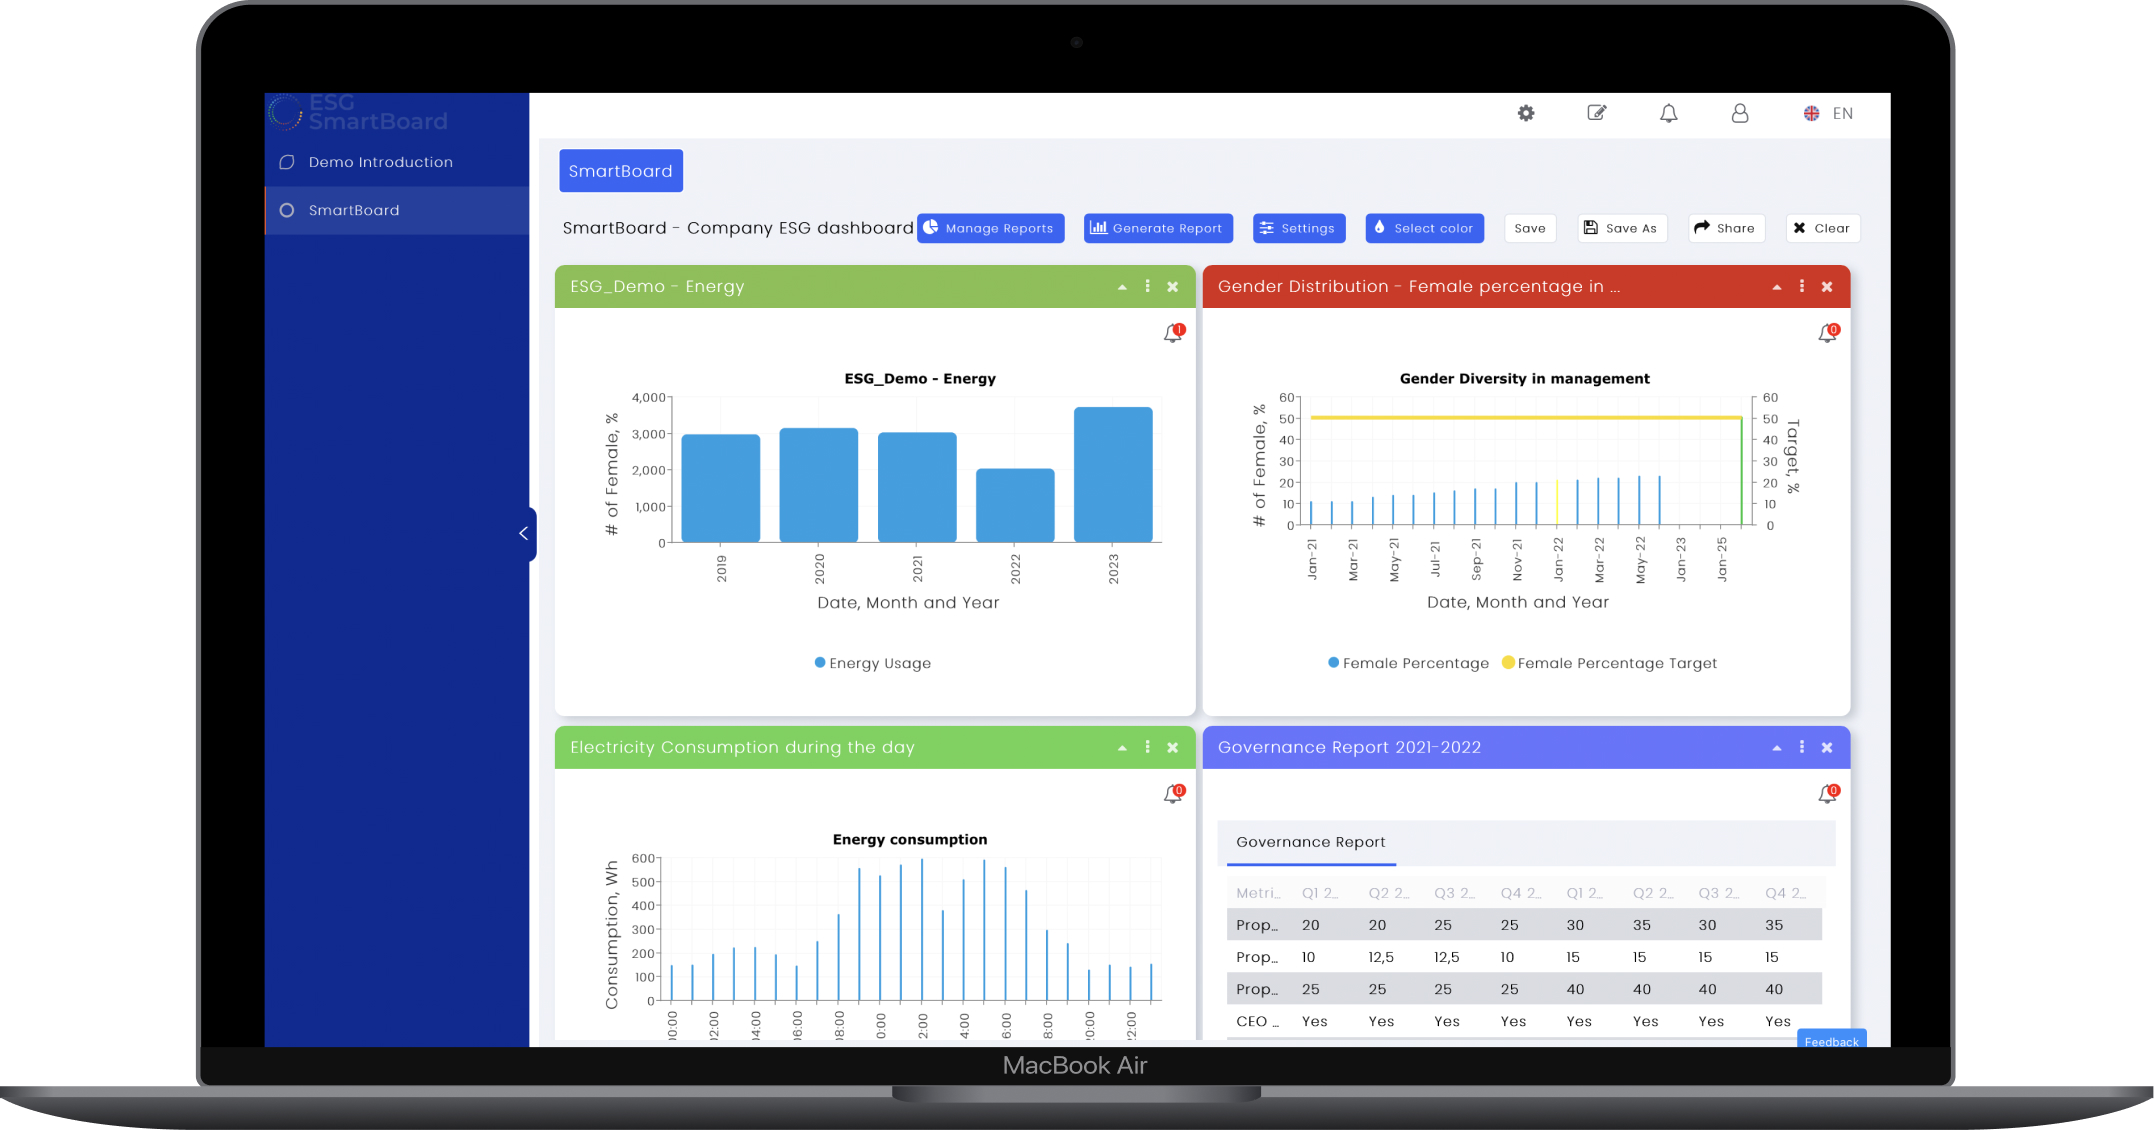 Each employee can create their own customizable dashboard, with all the wanted data, that can be displayed in any format.